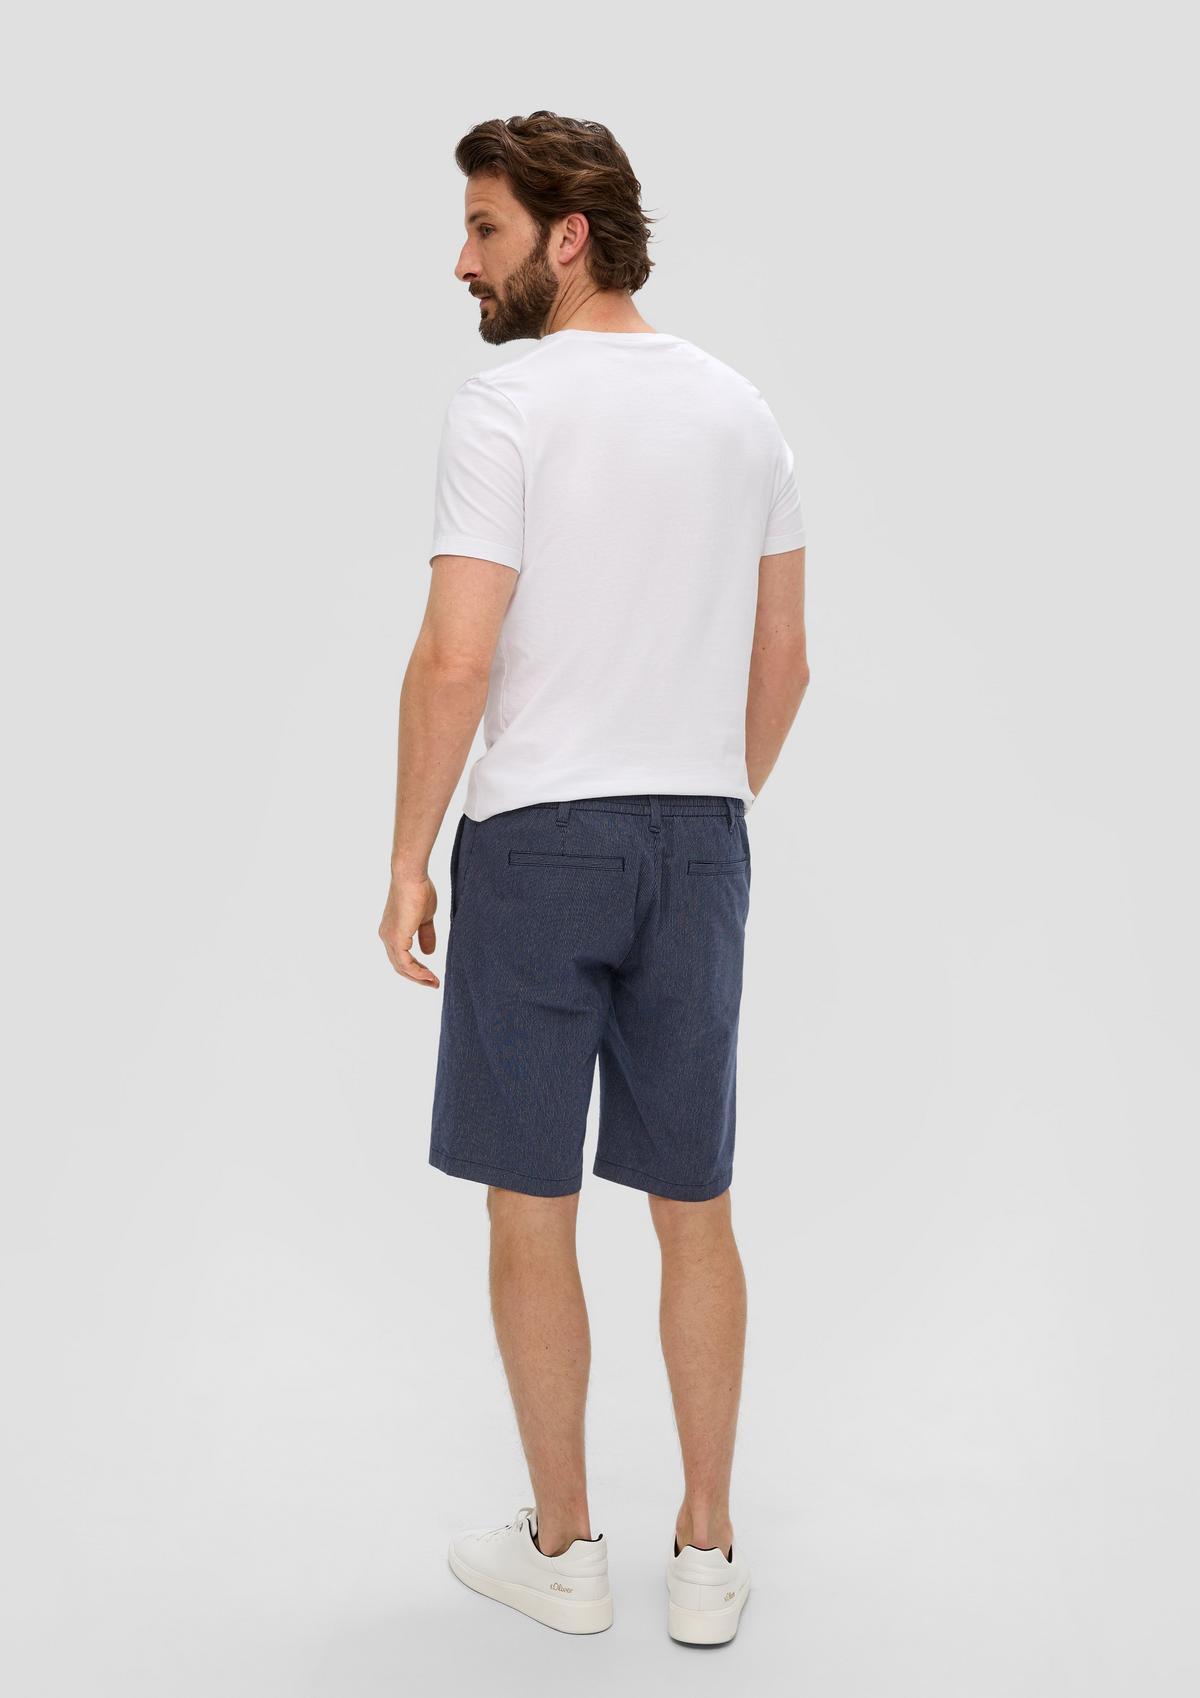 s.Oliver Regular fit: Bermuda shorts made of stretch cotton